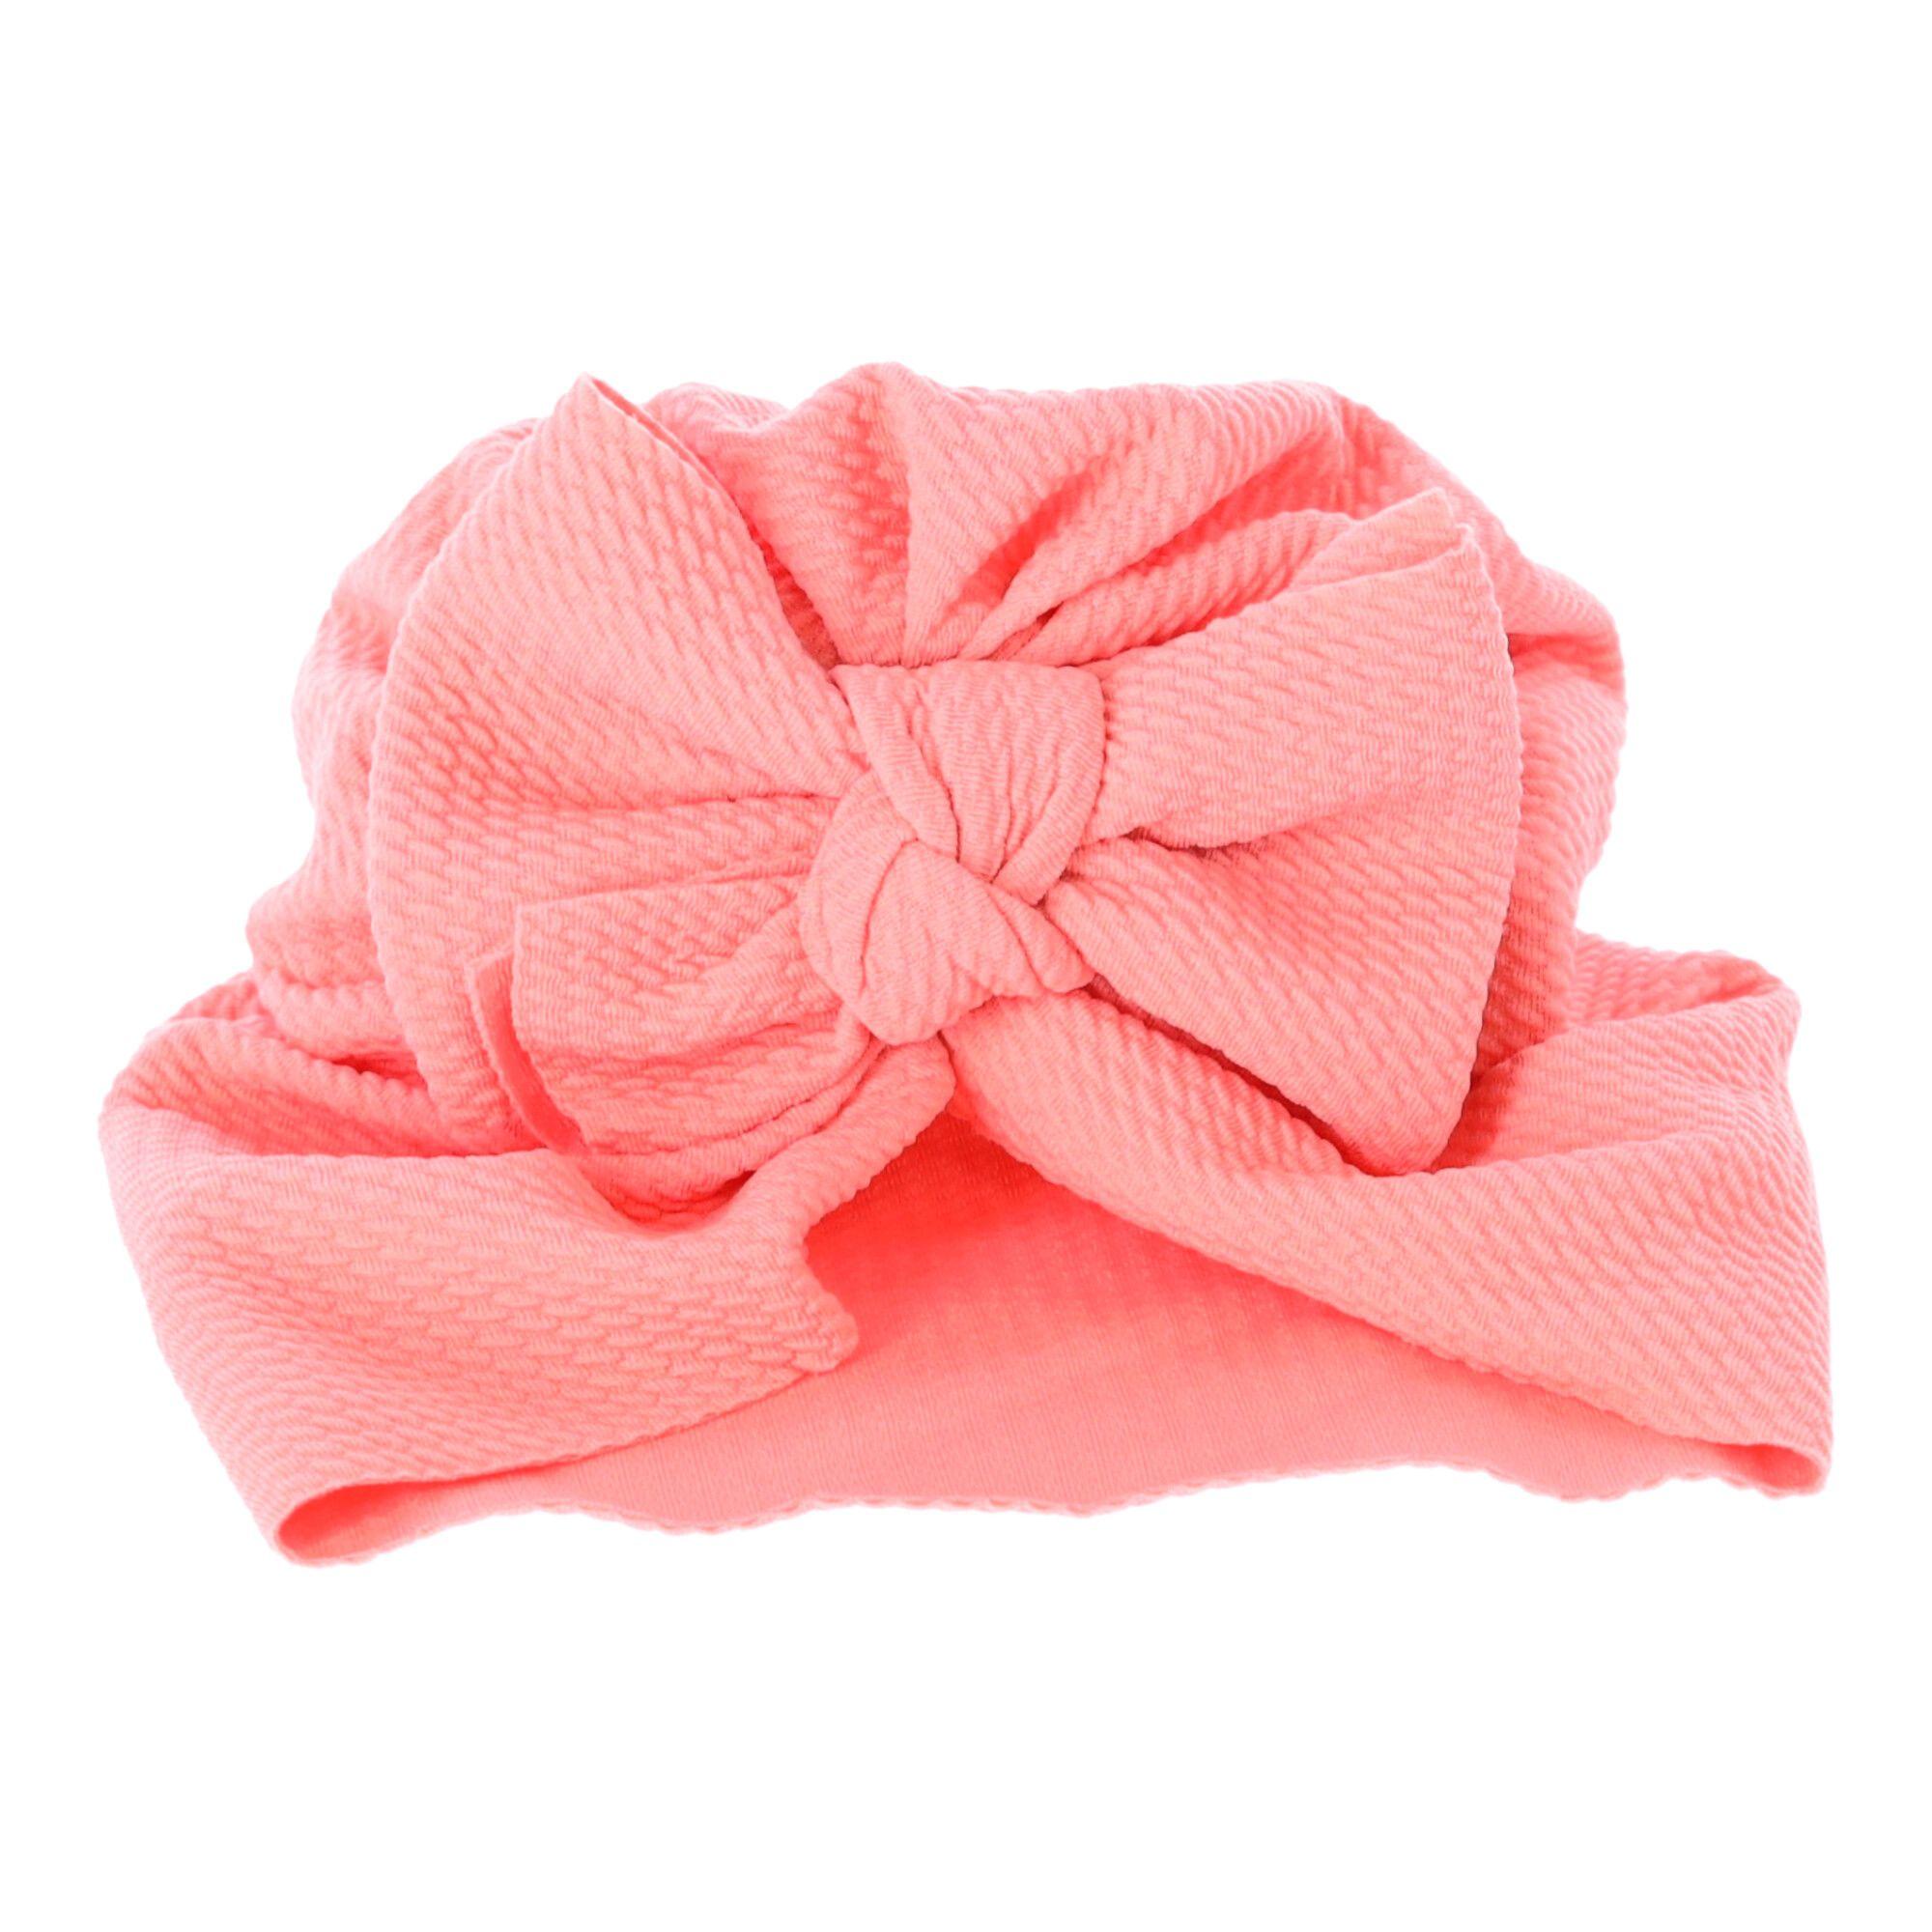 Baby turban with a bow, girl's hat - pink